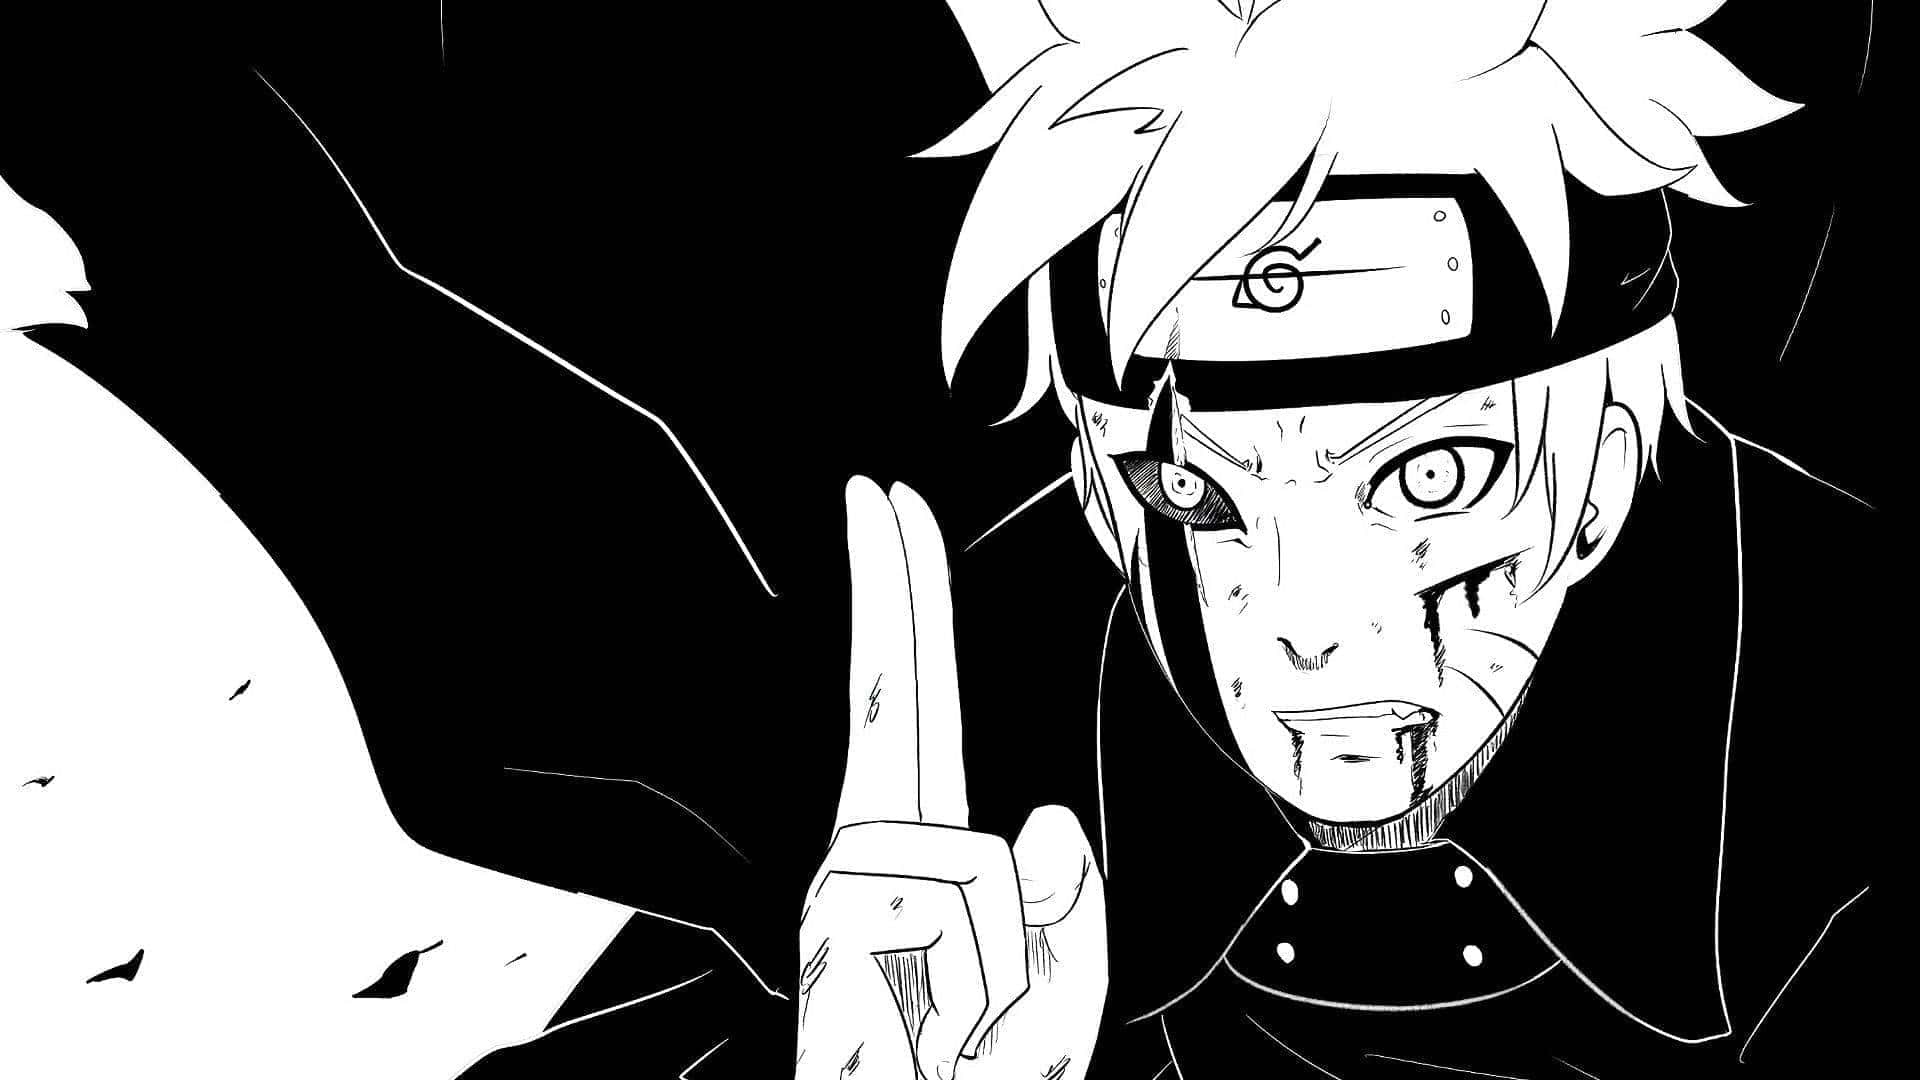 Boruto Uzumaki joins forces with the Hidden Leaf Village to stop the latest Byakugan threat. Wallpaper